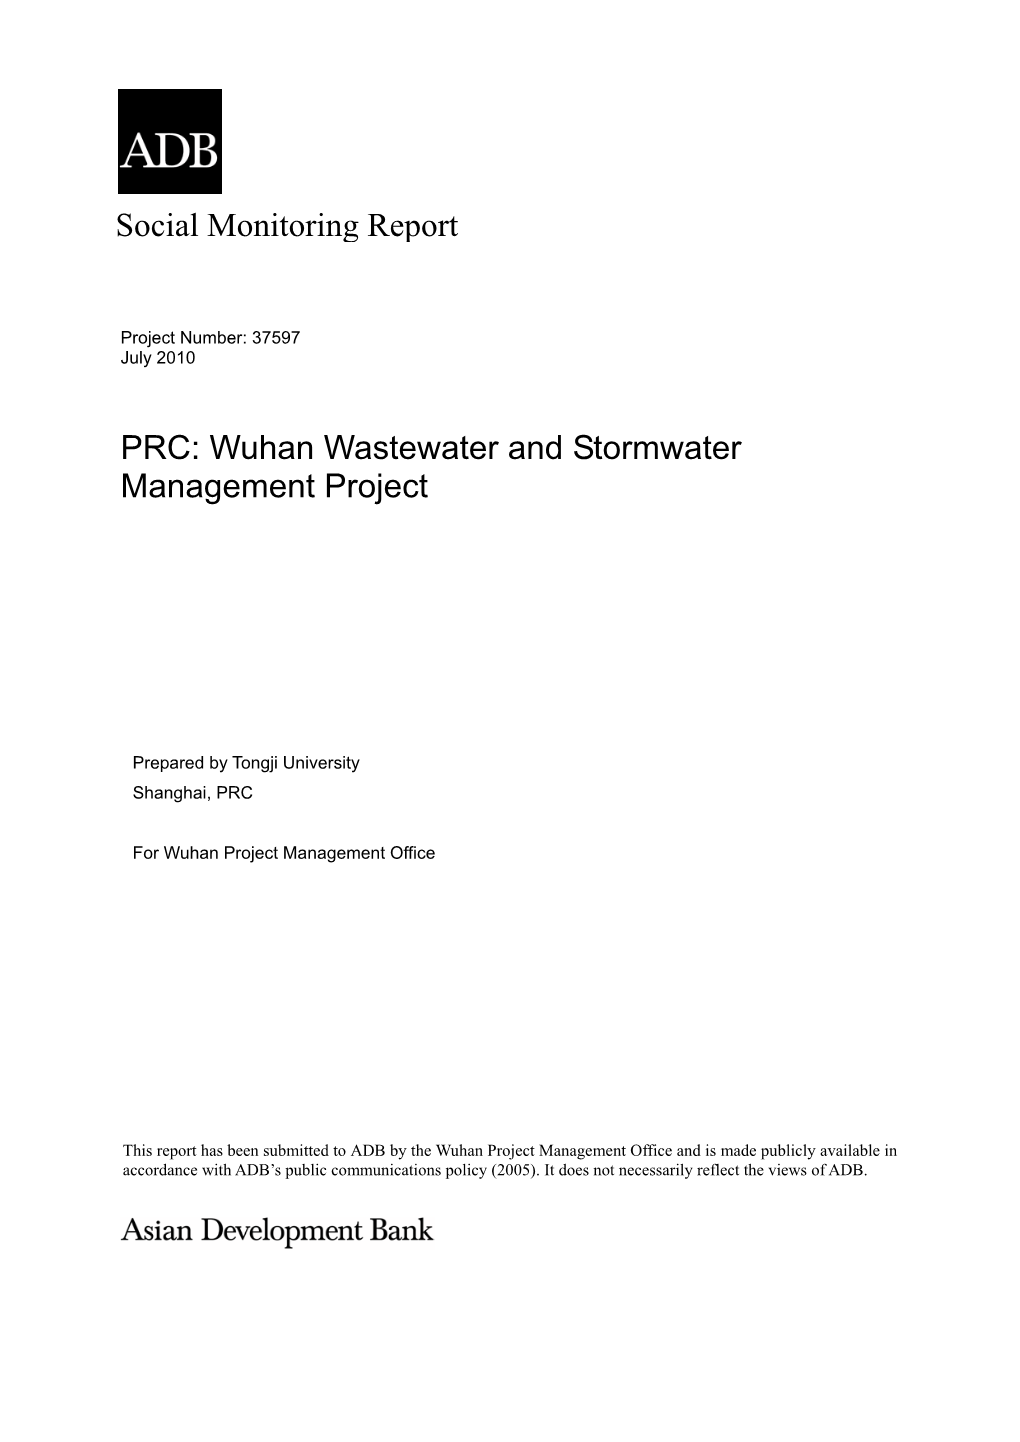 Social Monitoring Report PRC: Wuhan Wastewater and Stormwater